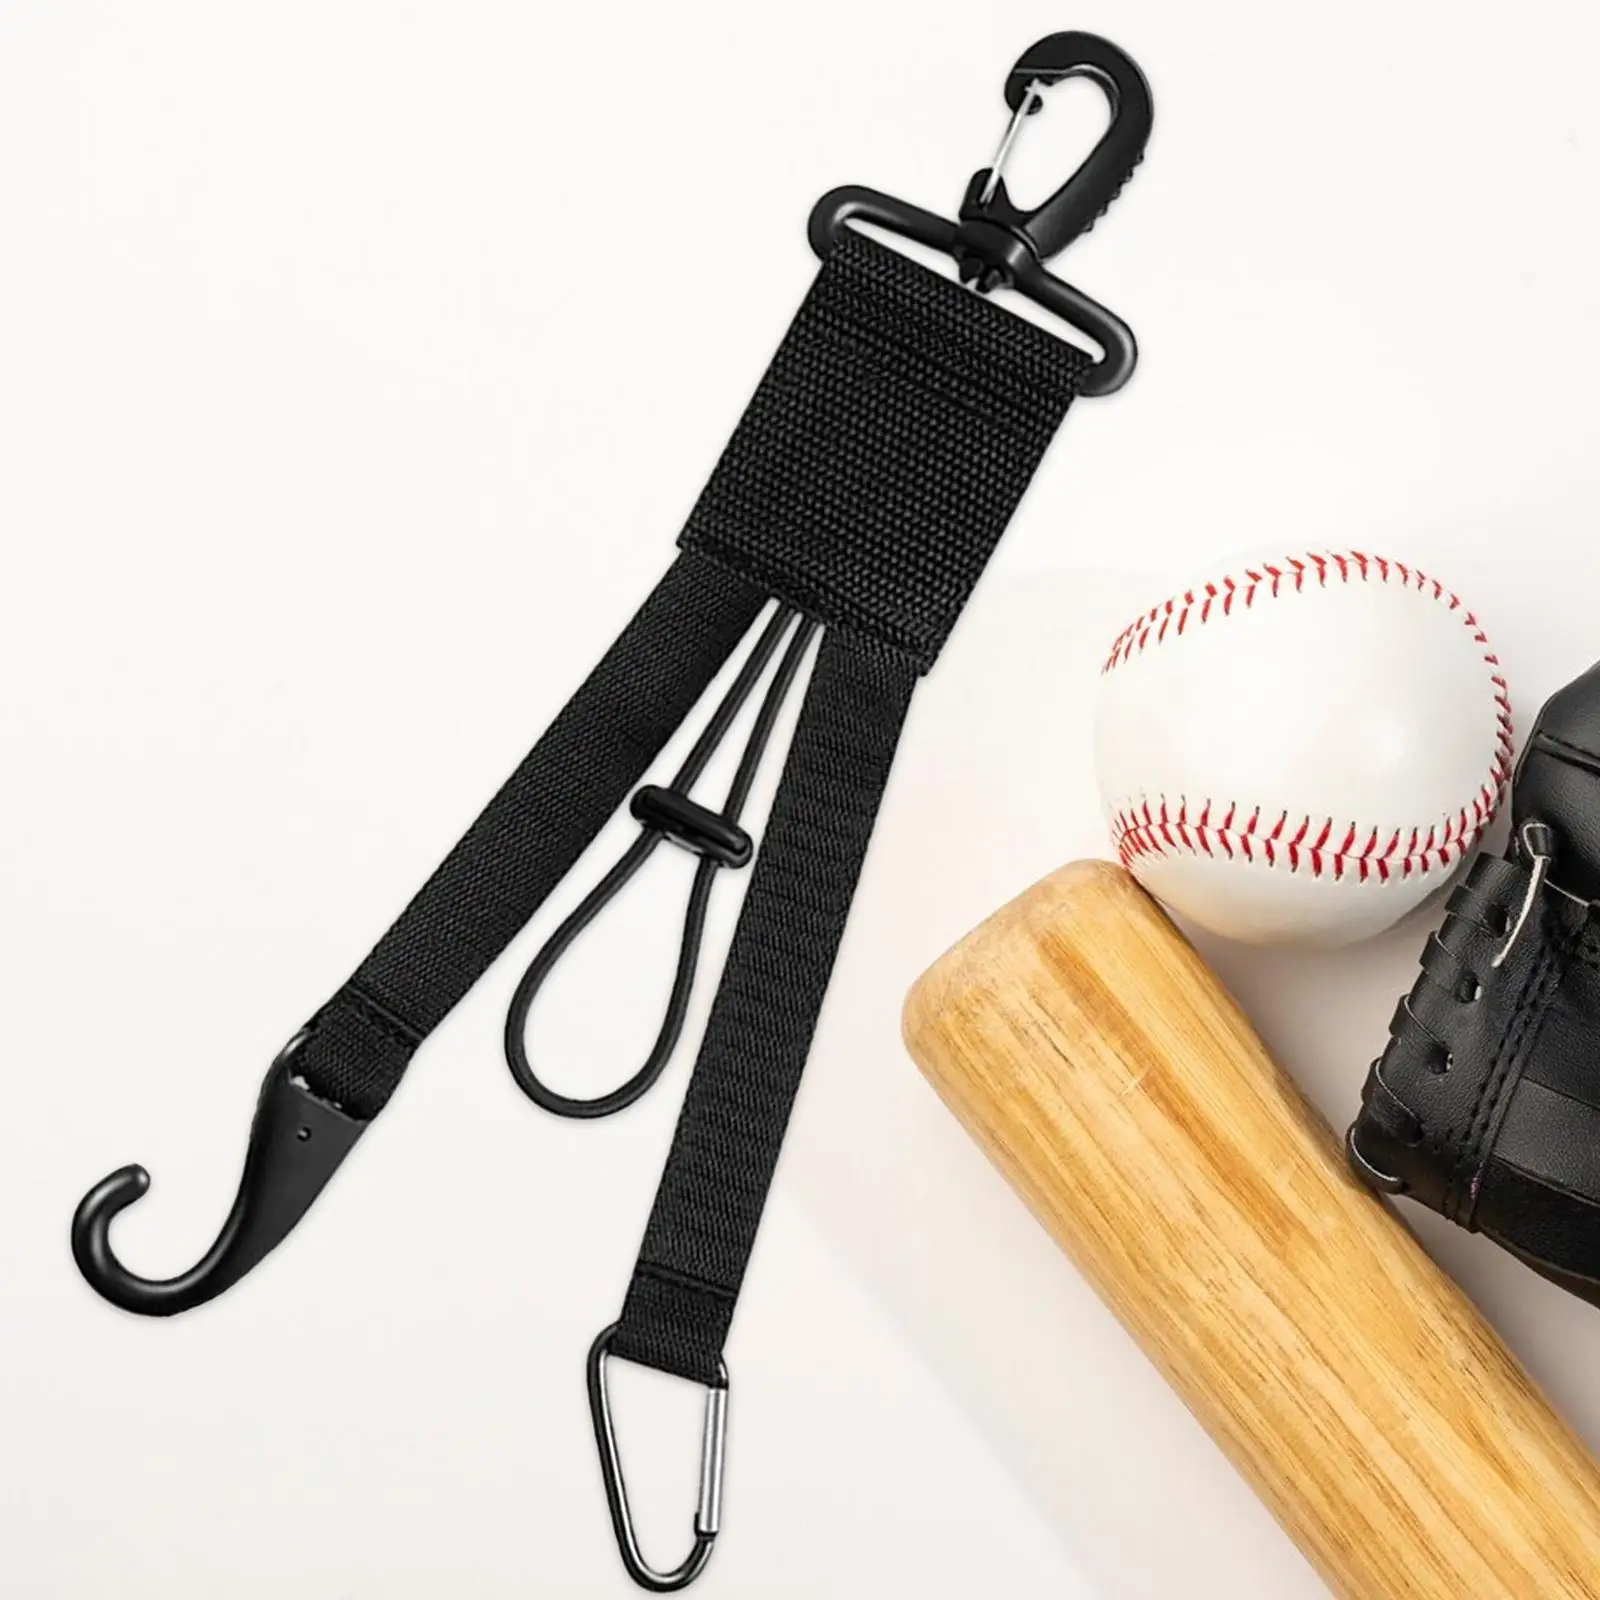 Baseball Softball Gear Hanger Fits in Any Backpack Keeps Your Glove Hat Bats Clean Adjustable Bungee Loop Dugout Organizer